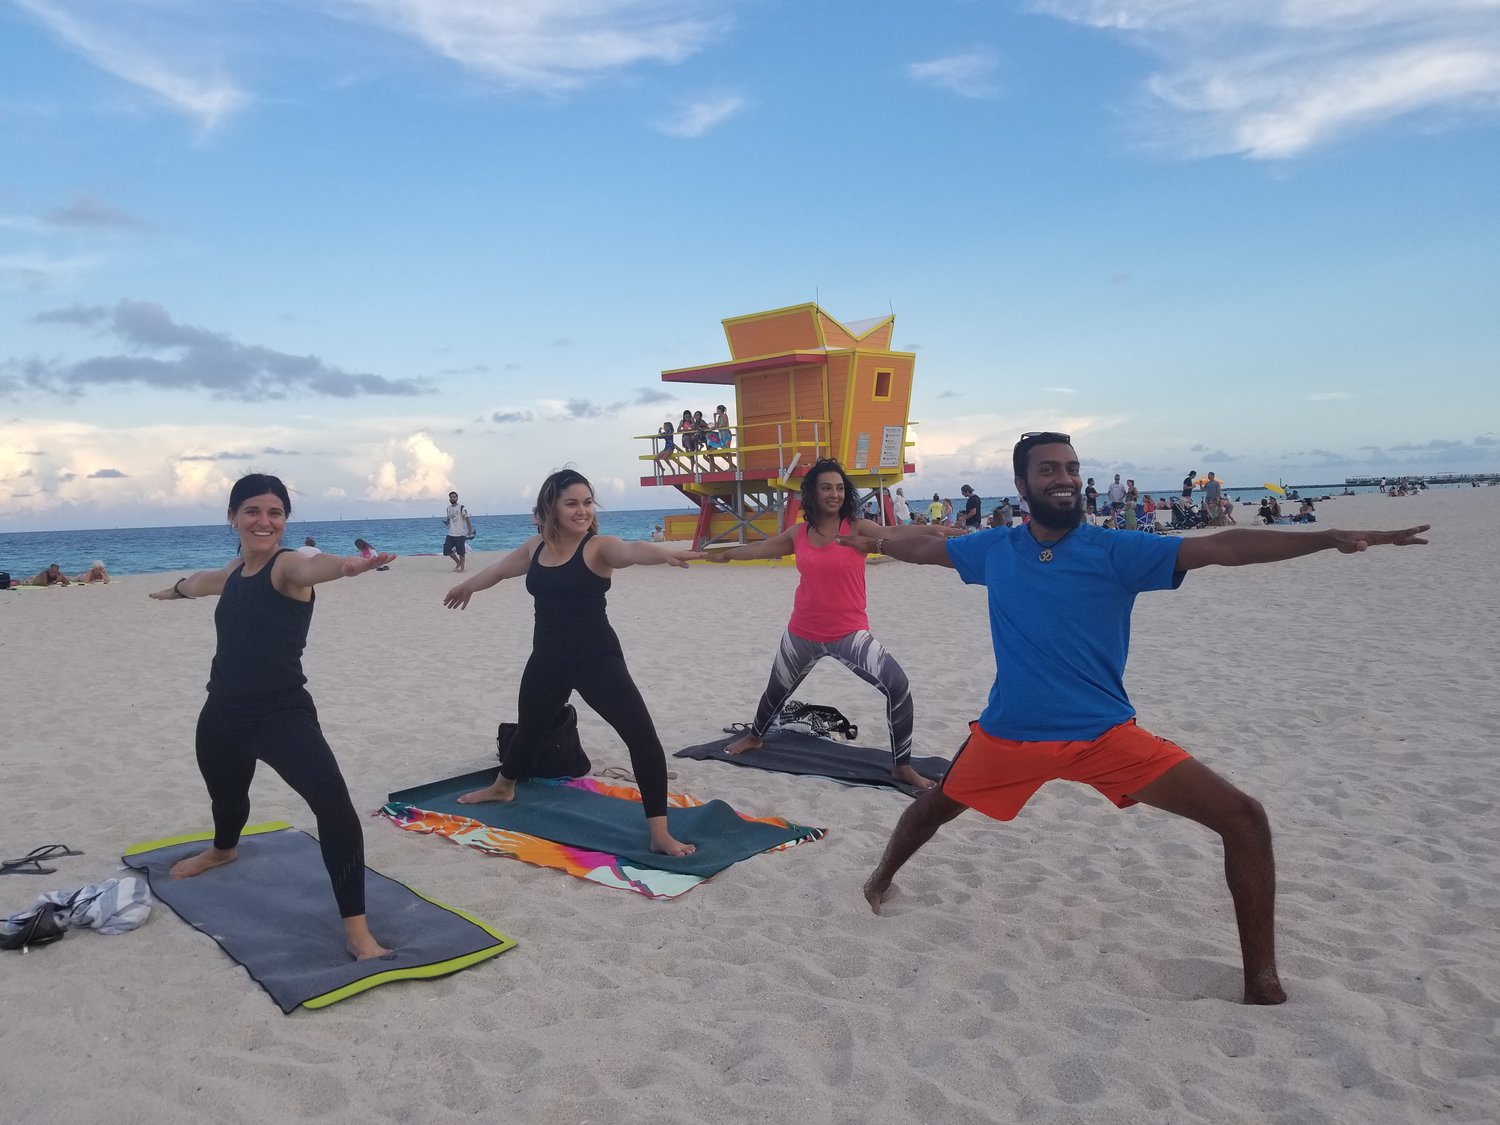 Yoga on South Beach - by donation, every day at 7 am and 5 pm (switches when the time changes)